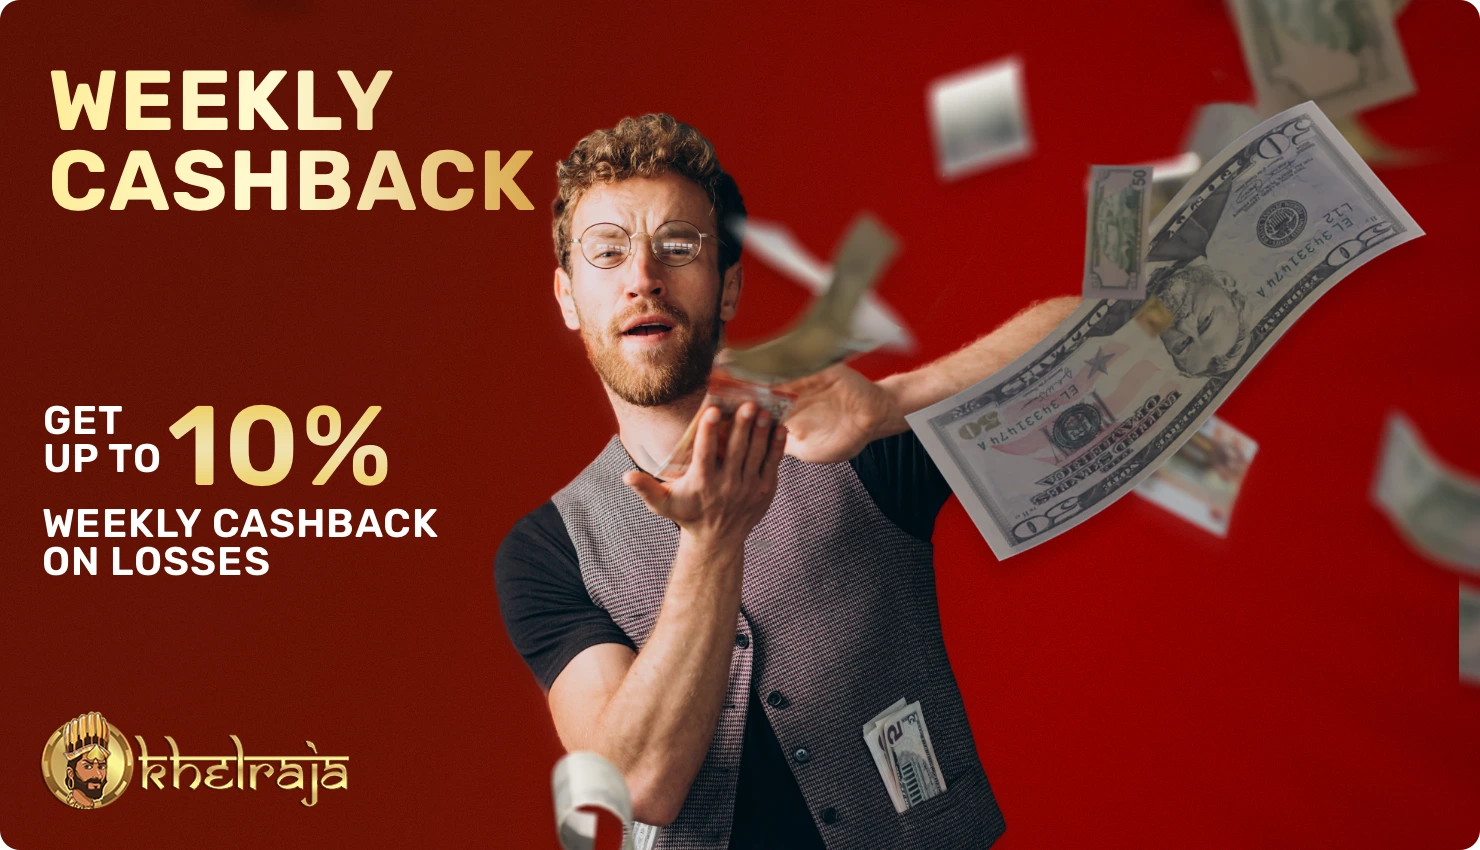 Weekly cashback allows Khelraja user to get a portion of the money they lost